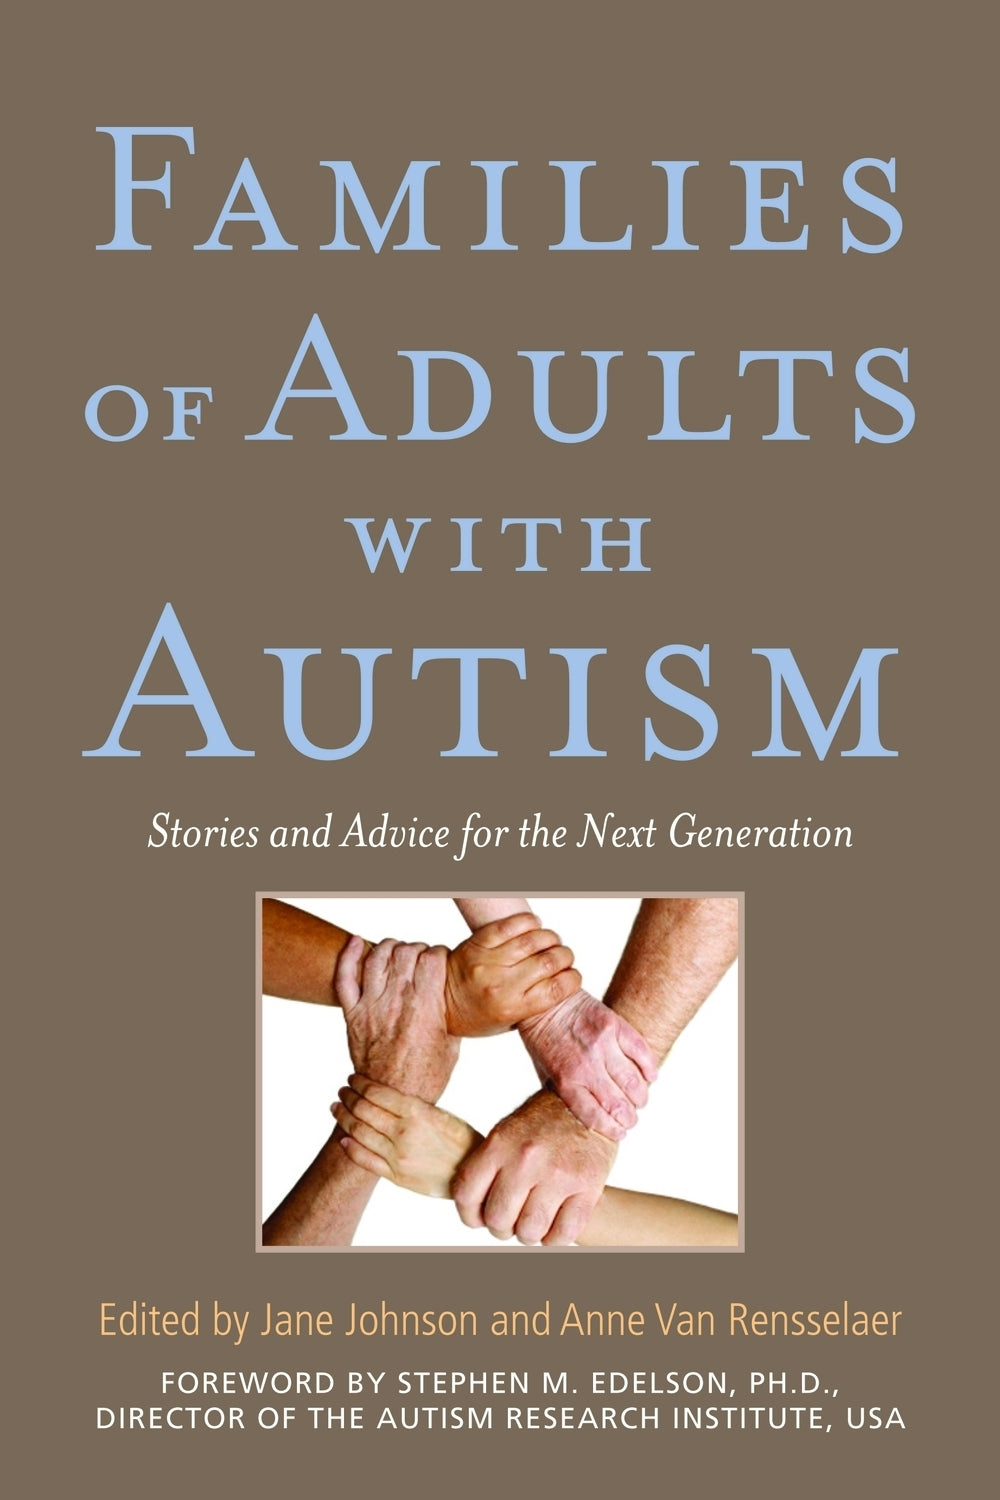 Families of Adults with Autism by Stephen M. Edelson, Jane Botsford Johnson, Anne Van Rensselaer, No Author Listed